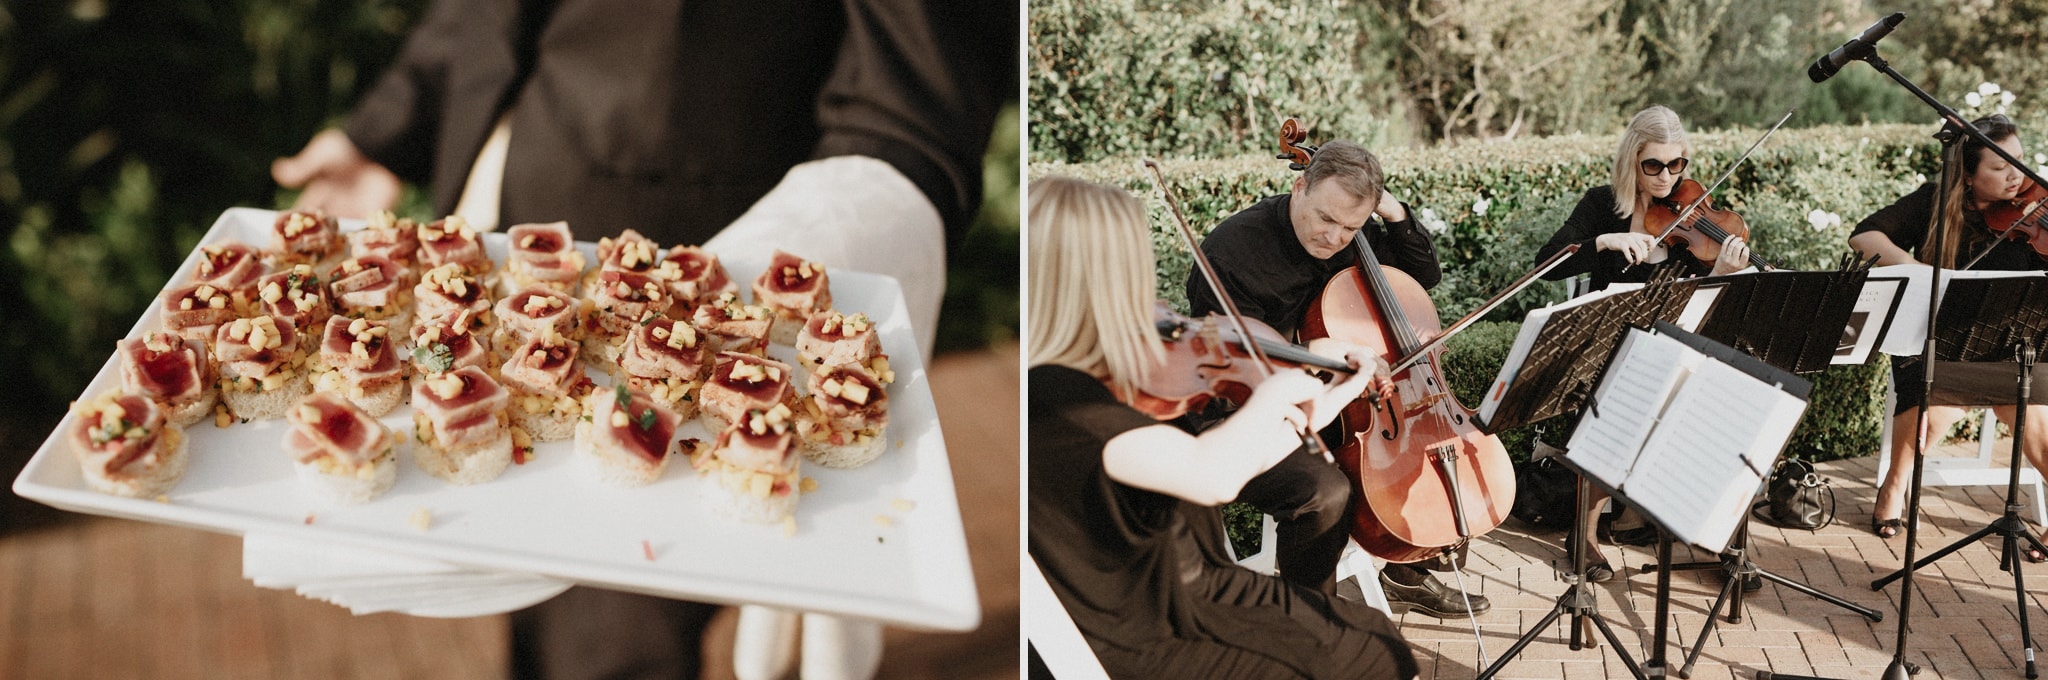 Hors d'oeuvres are served at a beautiful outdoor wedding at Pelican Hill Resort in California.